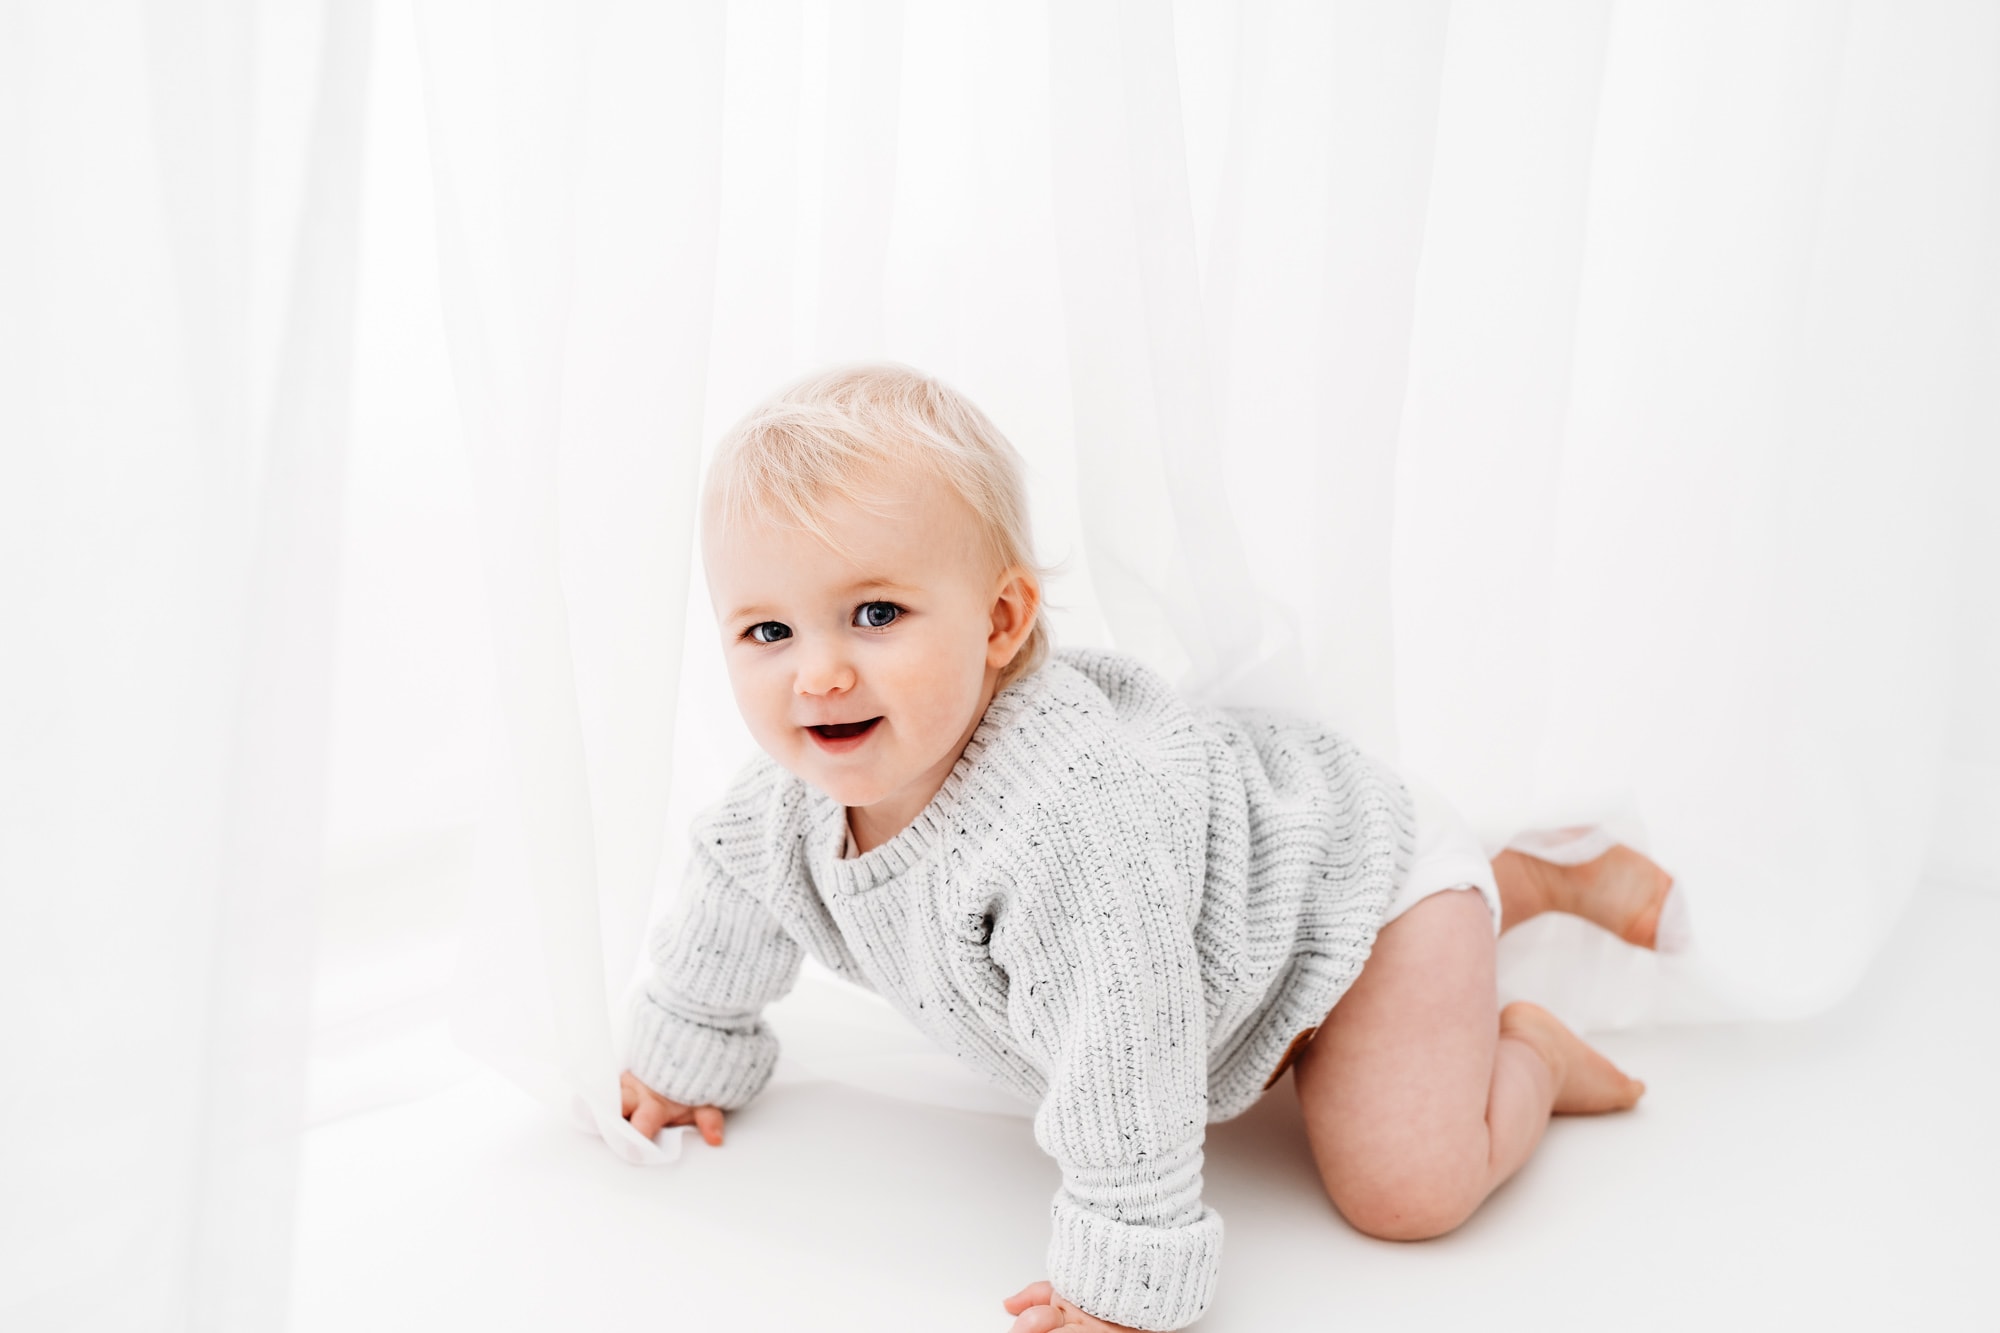 norwich baby photographer phtoographs little girl crawling toward camera smiling